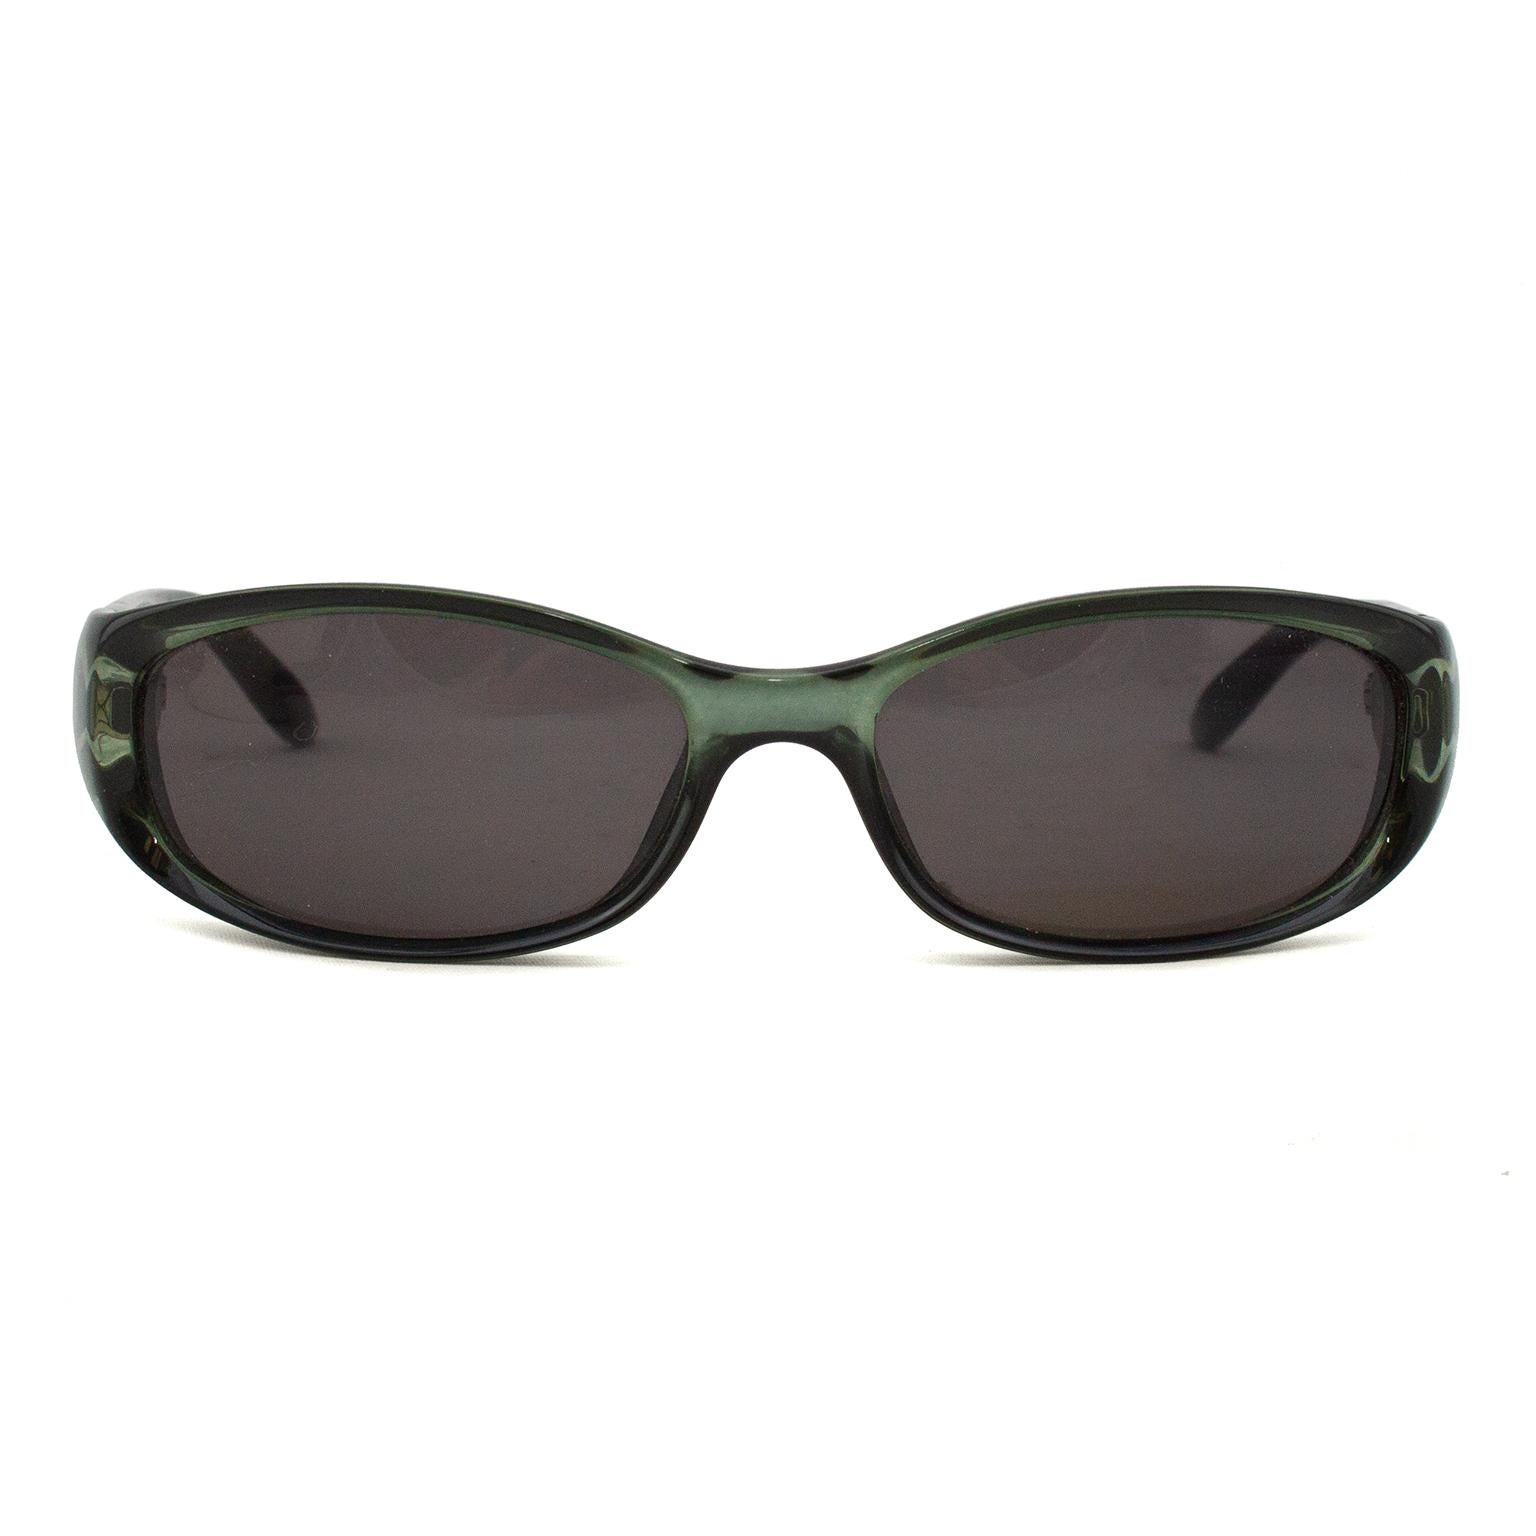 1990s green resin sunglasses. Dark silver Gucci square G logo on arm exterior and all other Gucci markings stamped in white on interior of arms. Black lenses. Made in Italy. Excellent vintage condition. Sold without original case. 